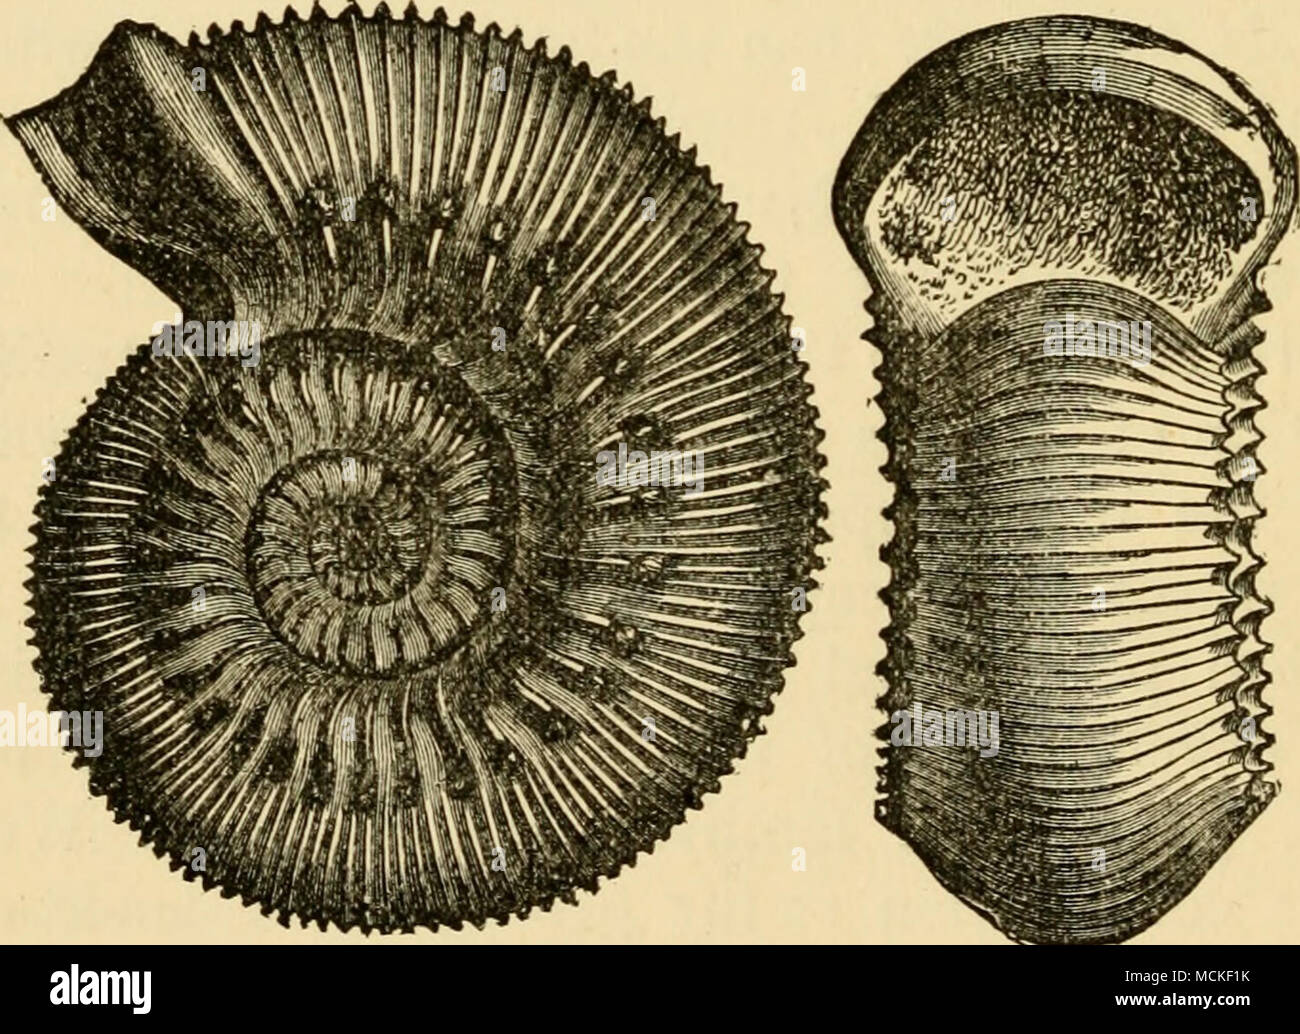 . Fig. 19. Ammonites Iluniphresianus. A form analogous to the Planulata. the shell ; that is to say, it gradually takes possession of the central turns also, as we trace the forms to higher strata. This reproduction in younger stages of life of modifications first occurring at a more advanced age, makes but slow progress, so that we see the older forms repeated with great persistency in the central turns. Frequently a modification of this sort has taken posses- sion of only a small part of the convolutions, when a new one already appears at the outside, and follows the Stock Photo